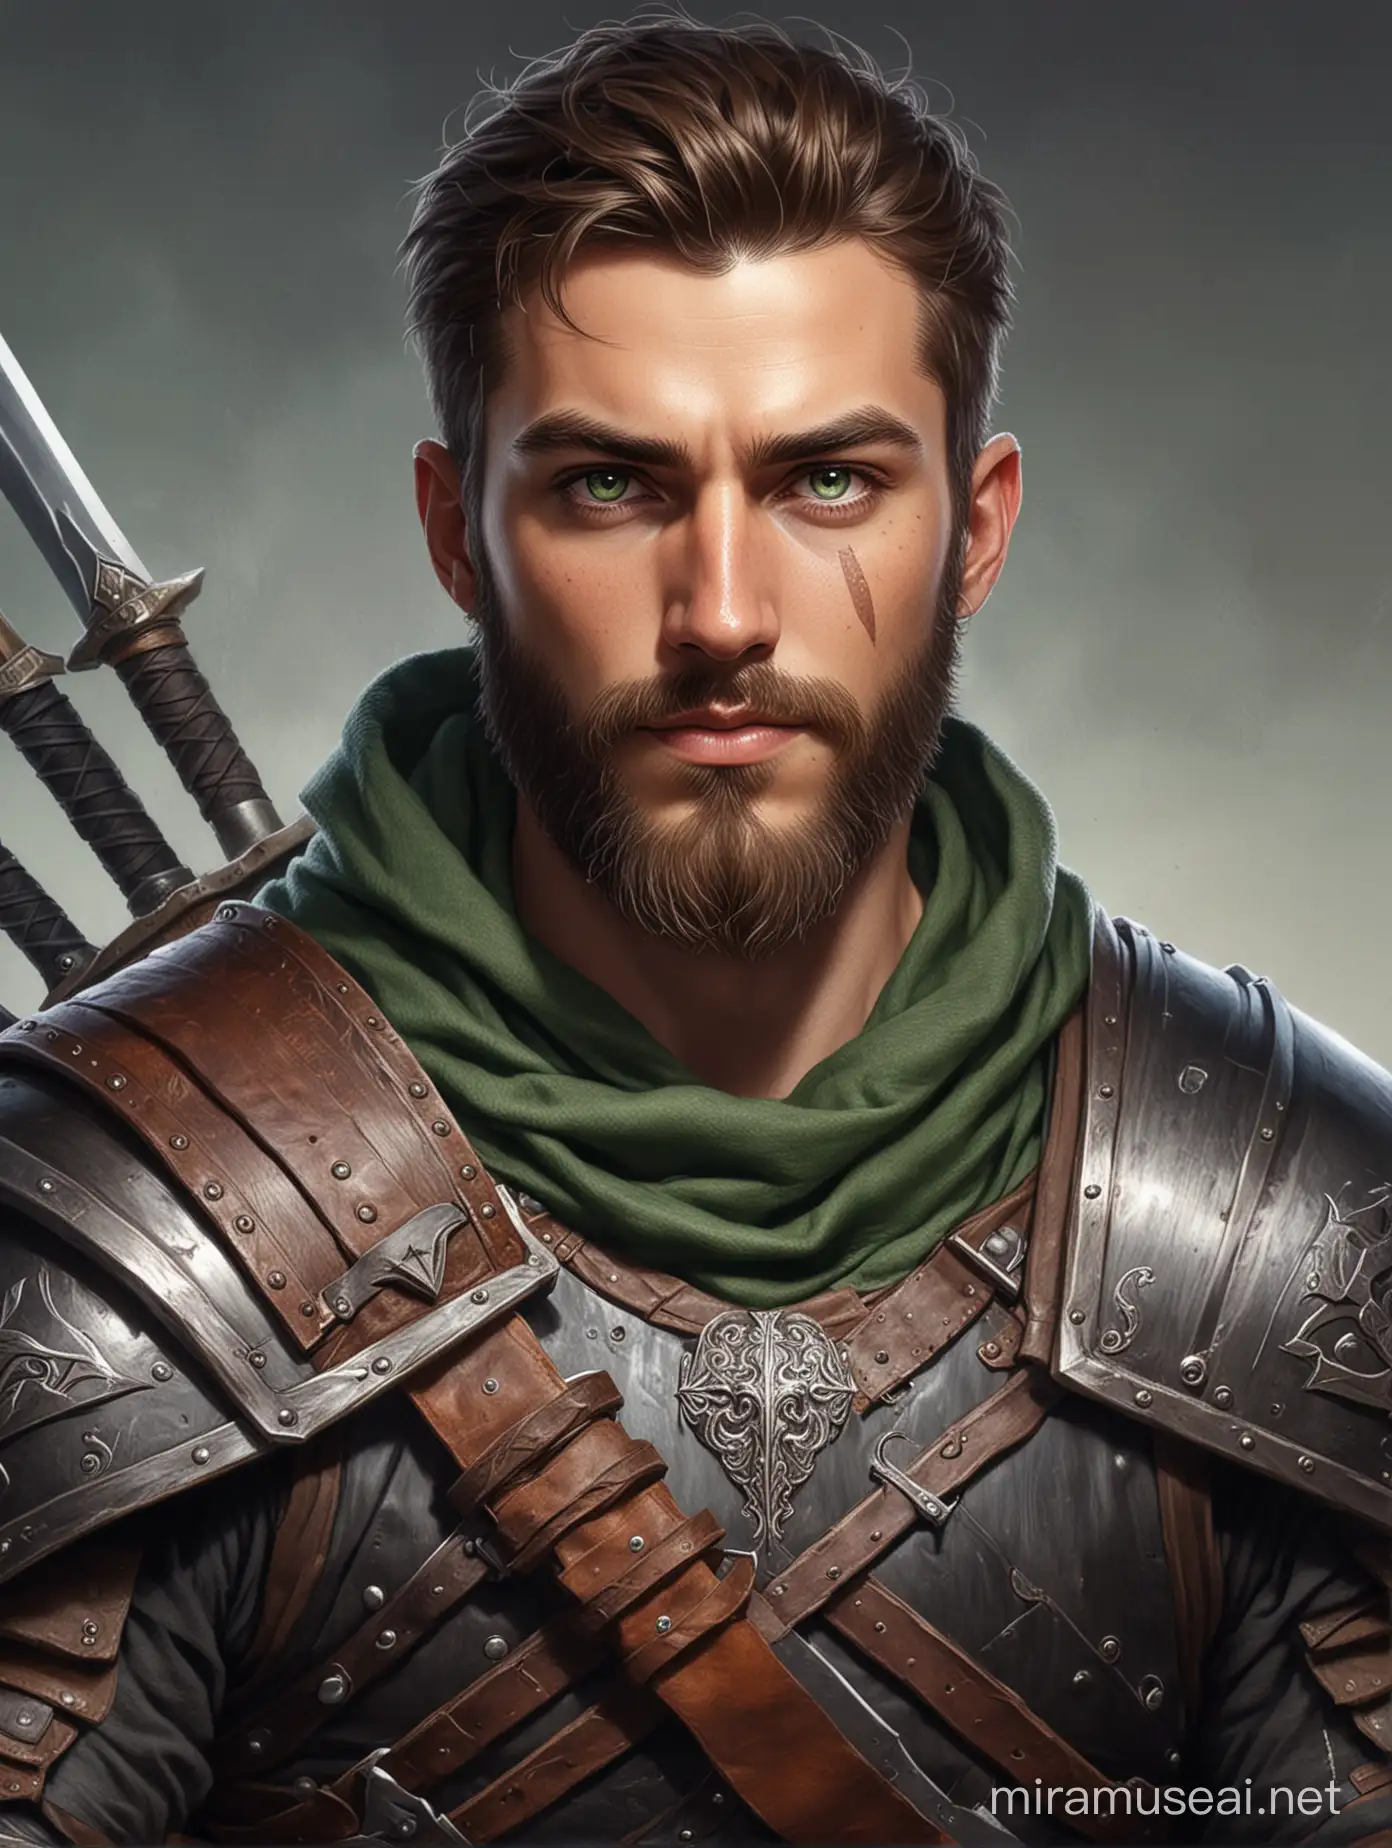 draw a human fighter, 30 years old man with beard, green eyes, nice face, leather armor and two swords, holding two swords, D&D